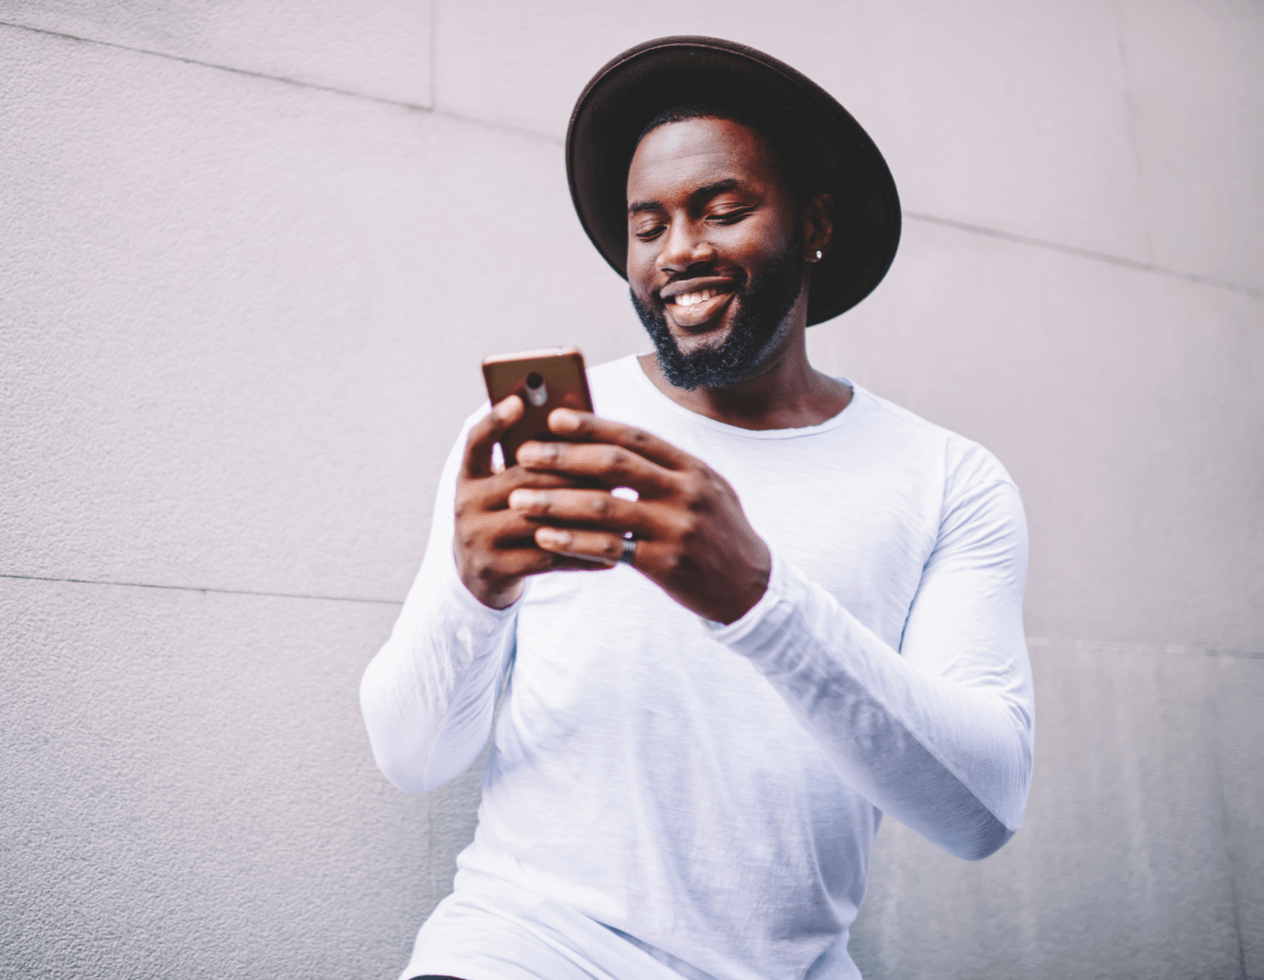 African American man wearing a white shirt and brown fedora smiling while looking at his cell phone.